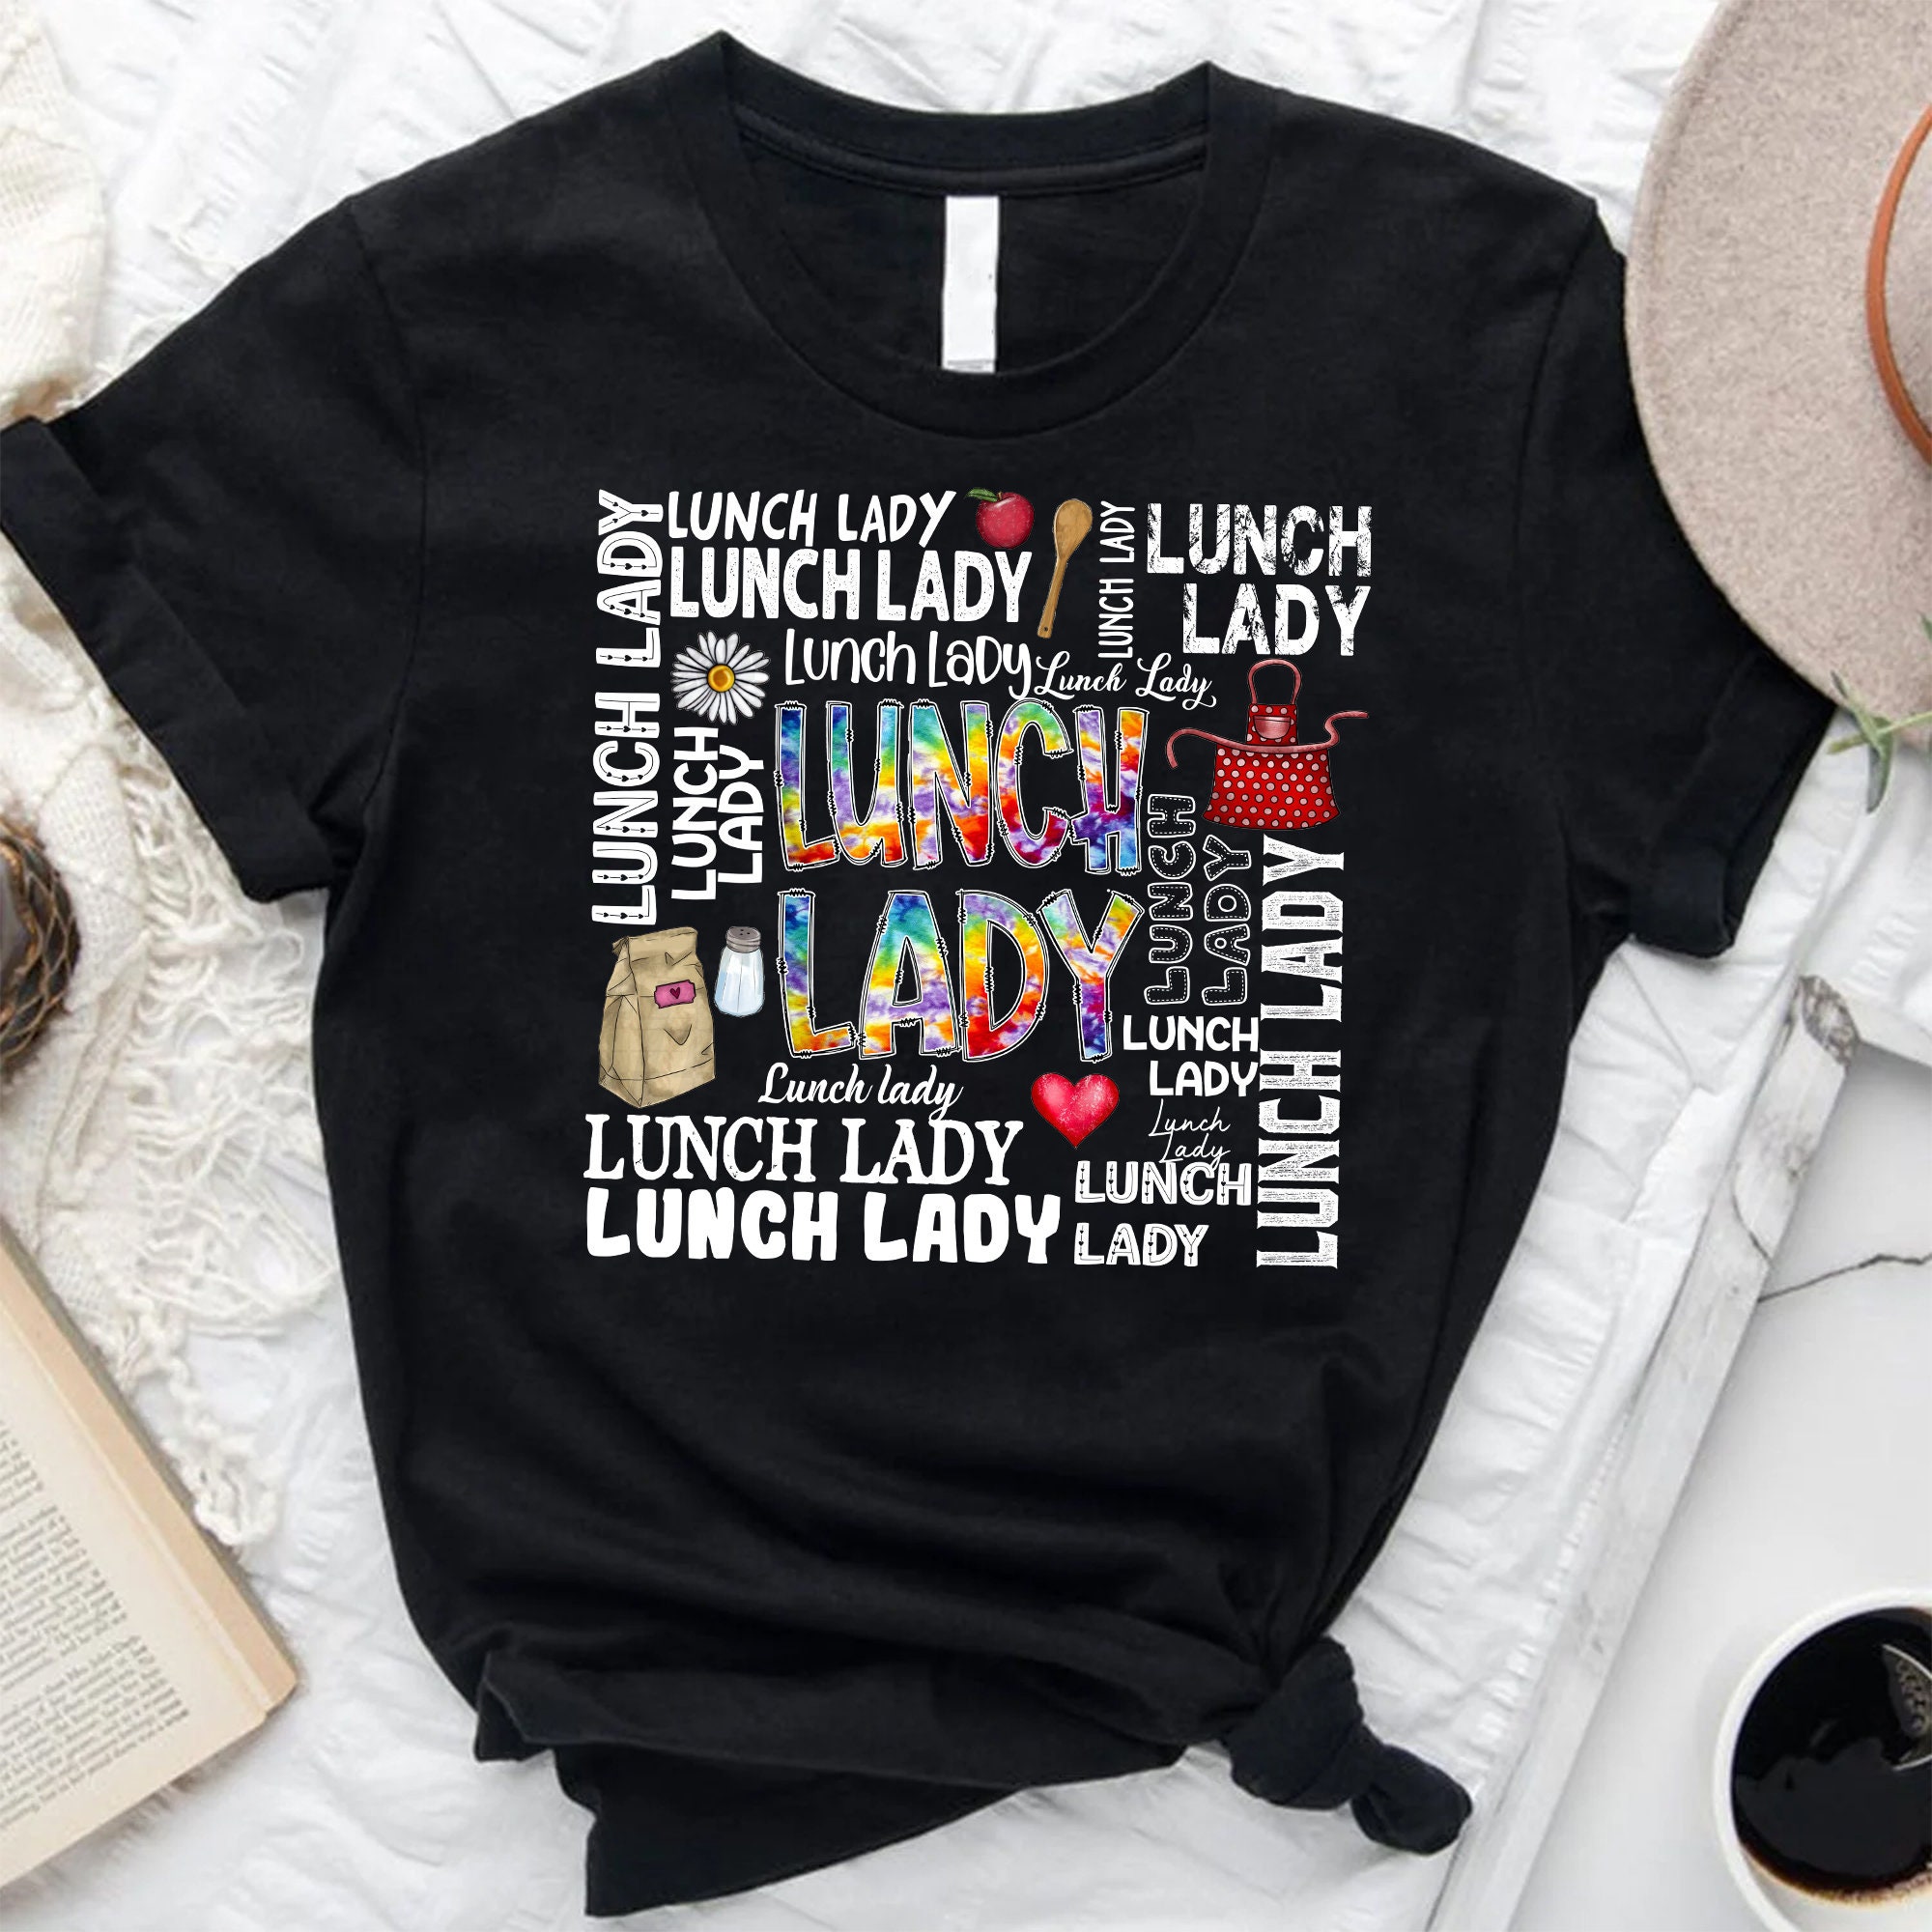 Discover Lunch Lady Shirt, Lunch Lady Gift, Lunch Lady Tee, Cafeteria Worker, School Cafeteria, Lunch Lady Life, Cafeteria Team Shirts